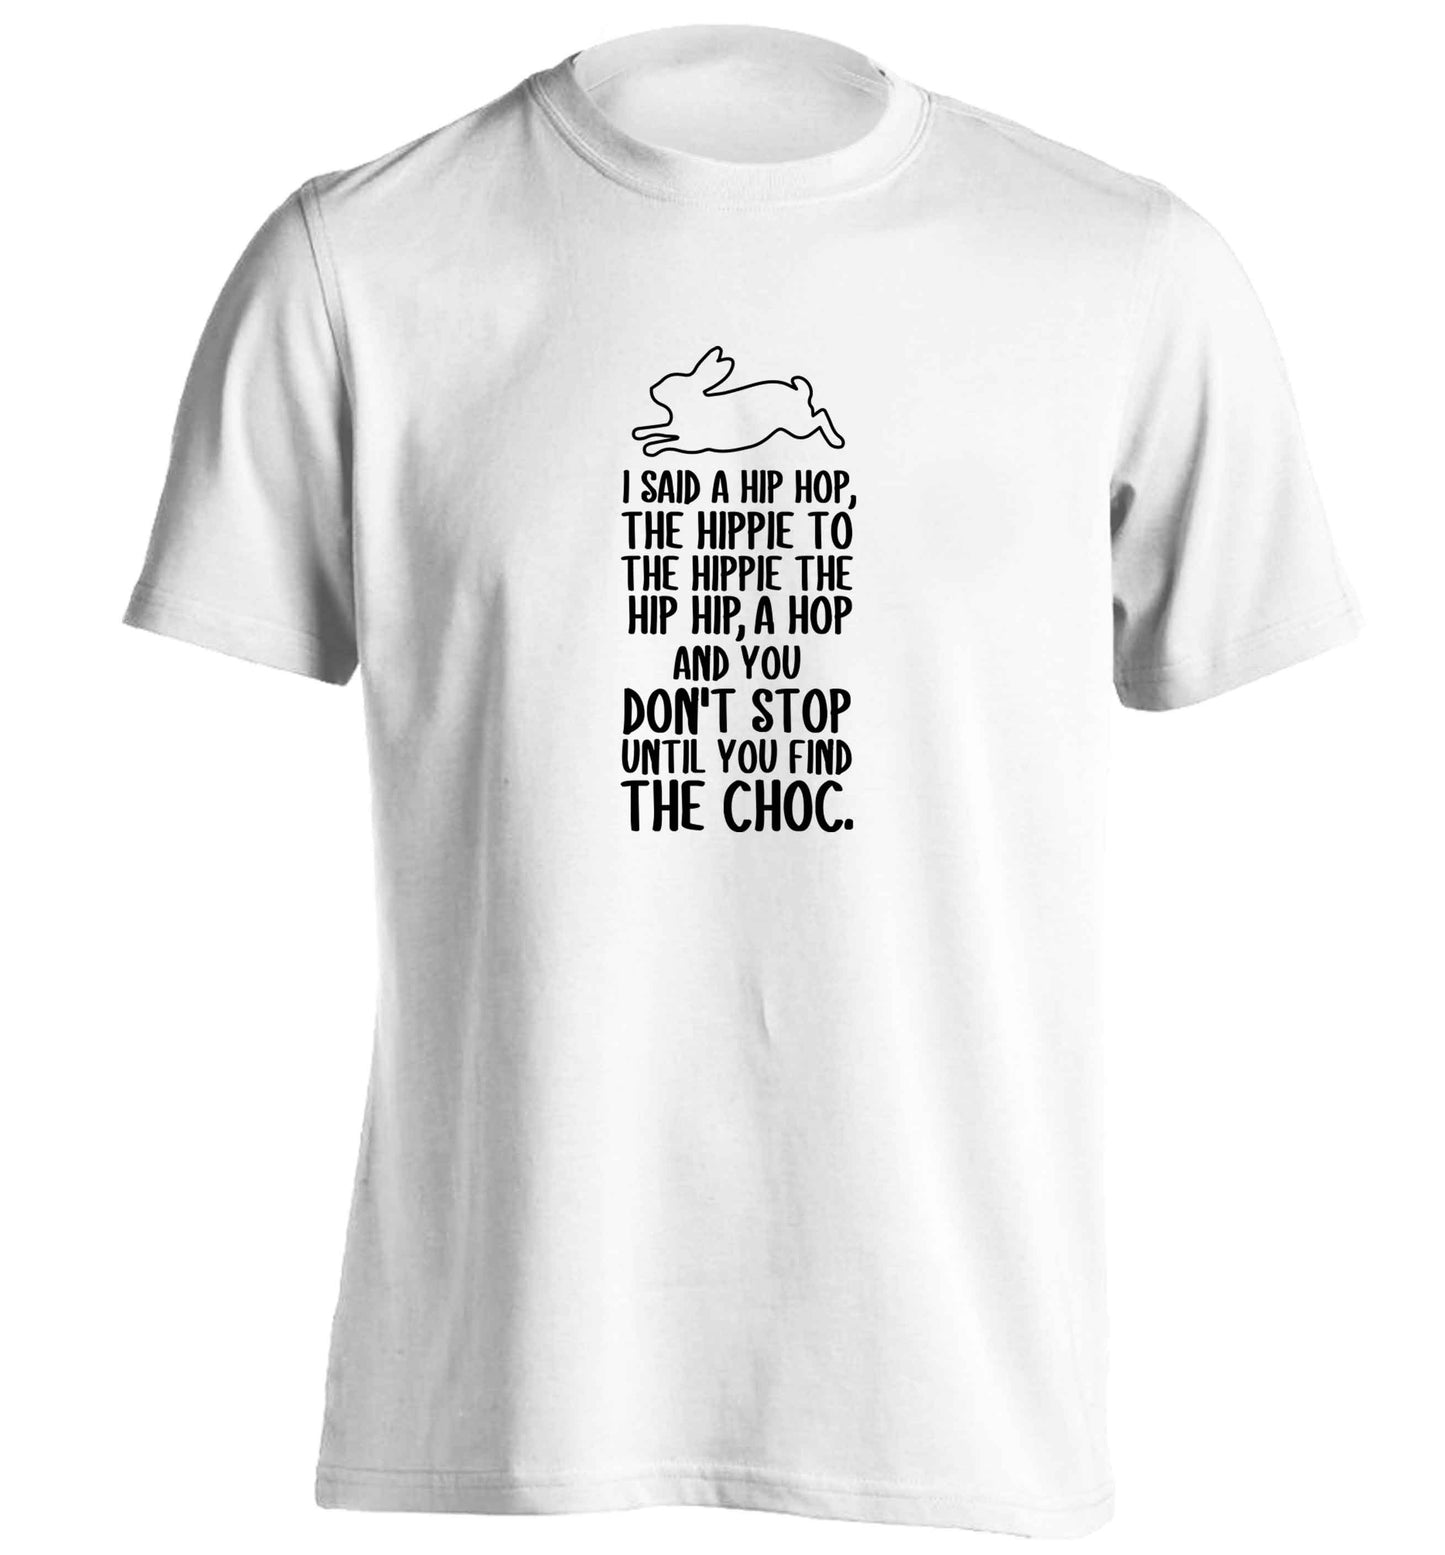 Don't stop until you find the choc adults unisex white Tshirt 2XL